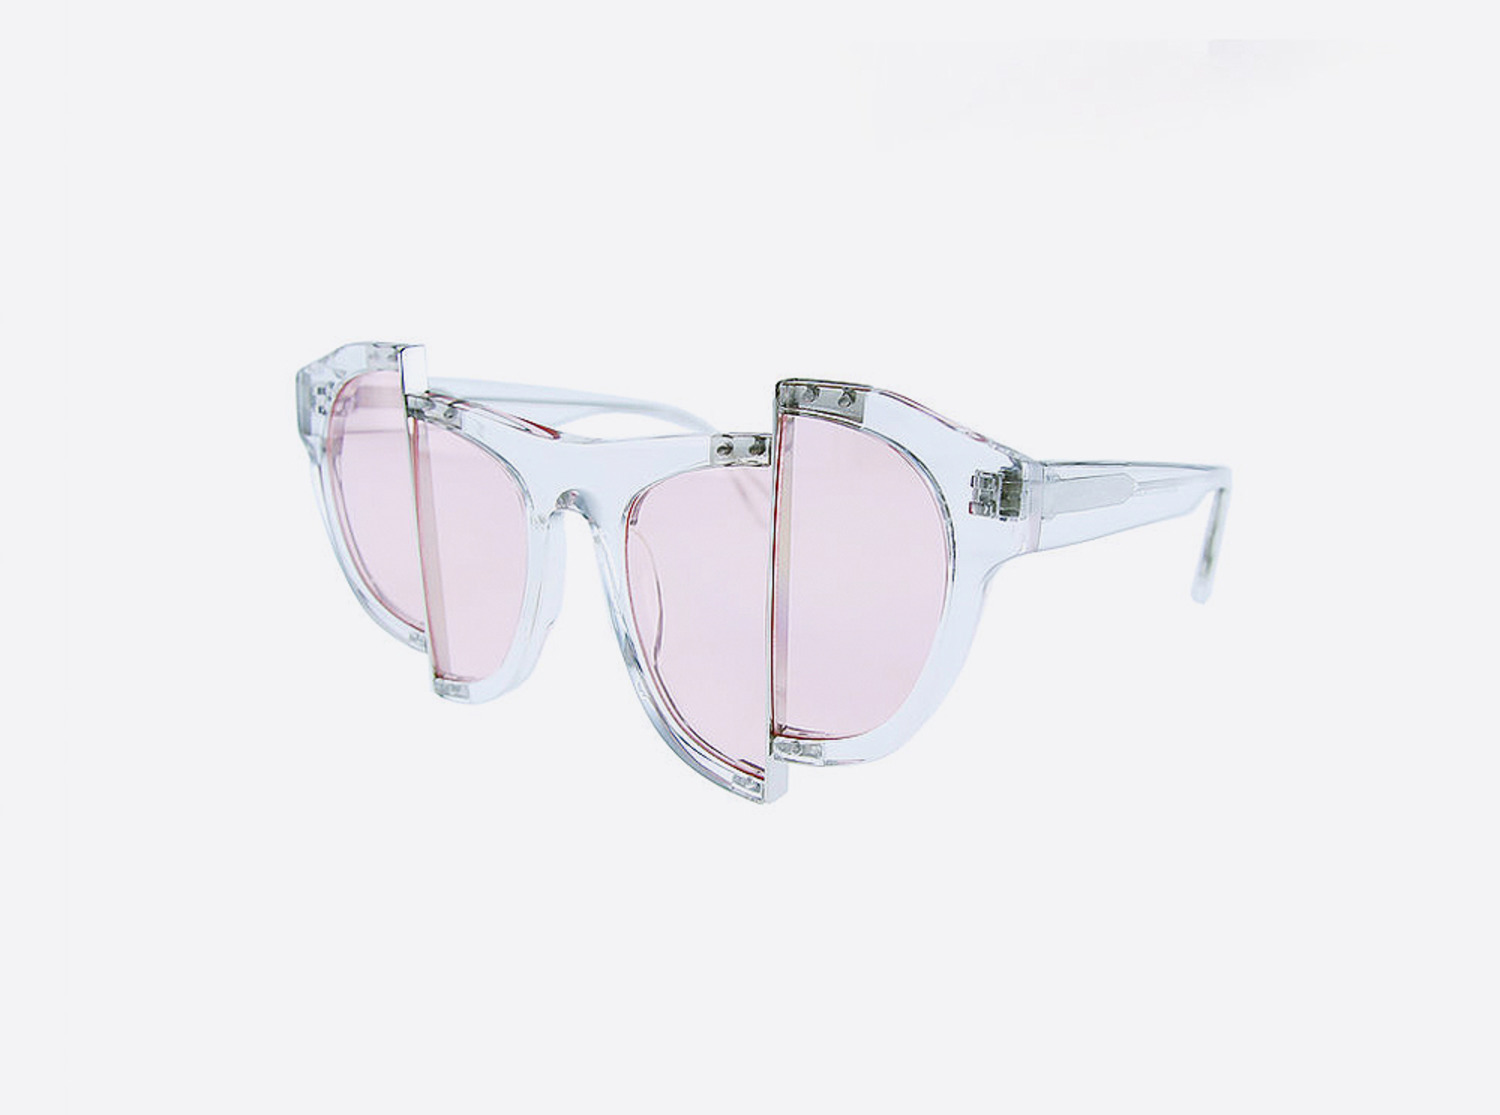 GOGGLES PINK-3